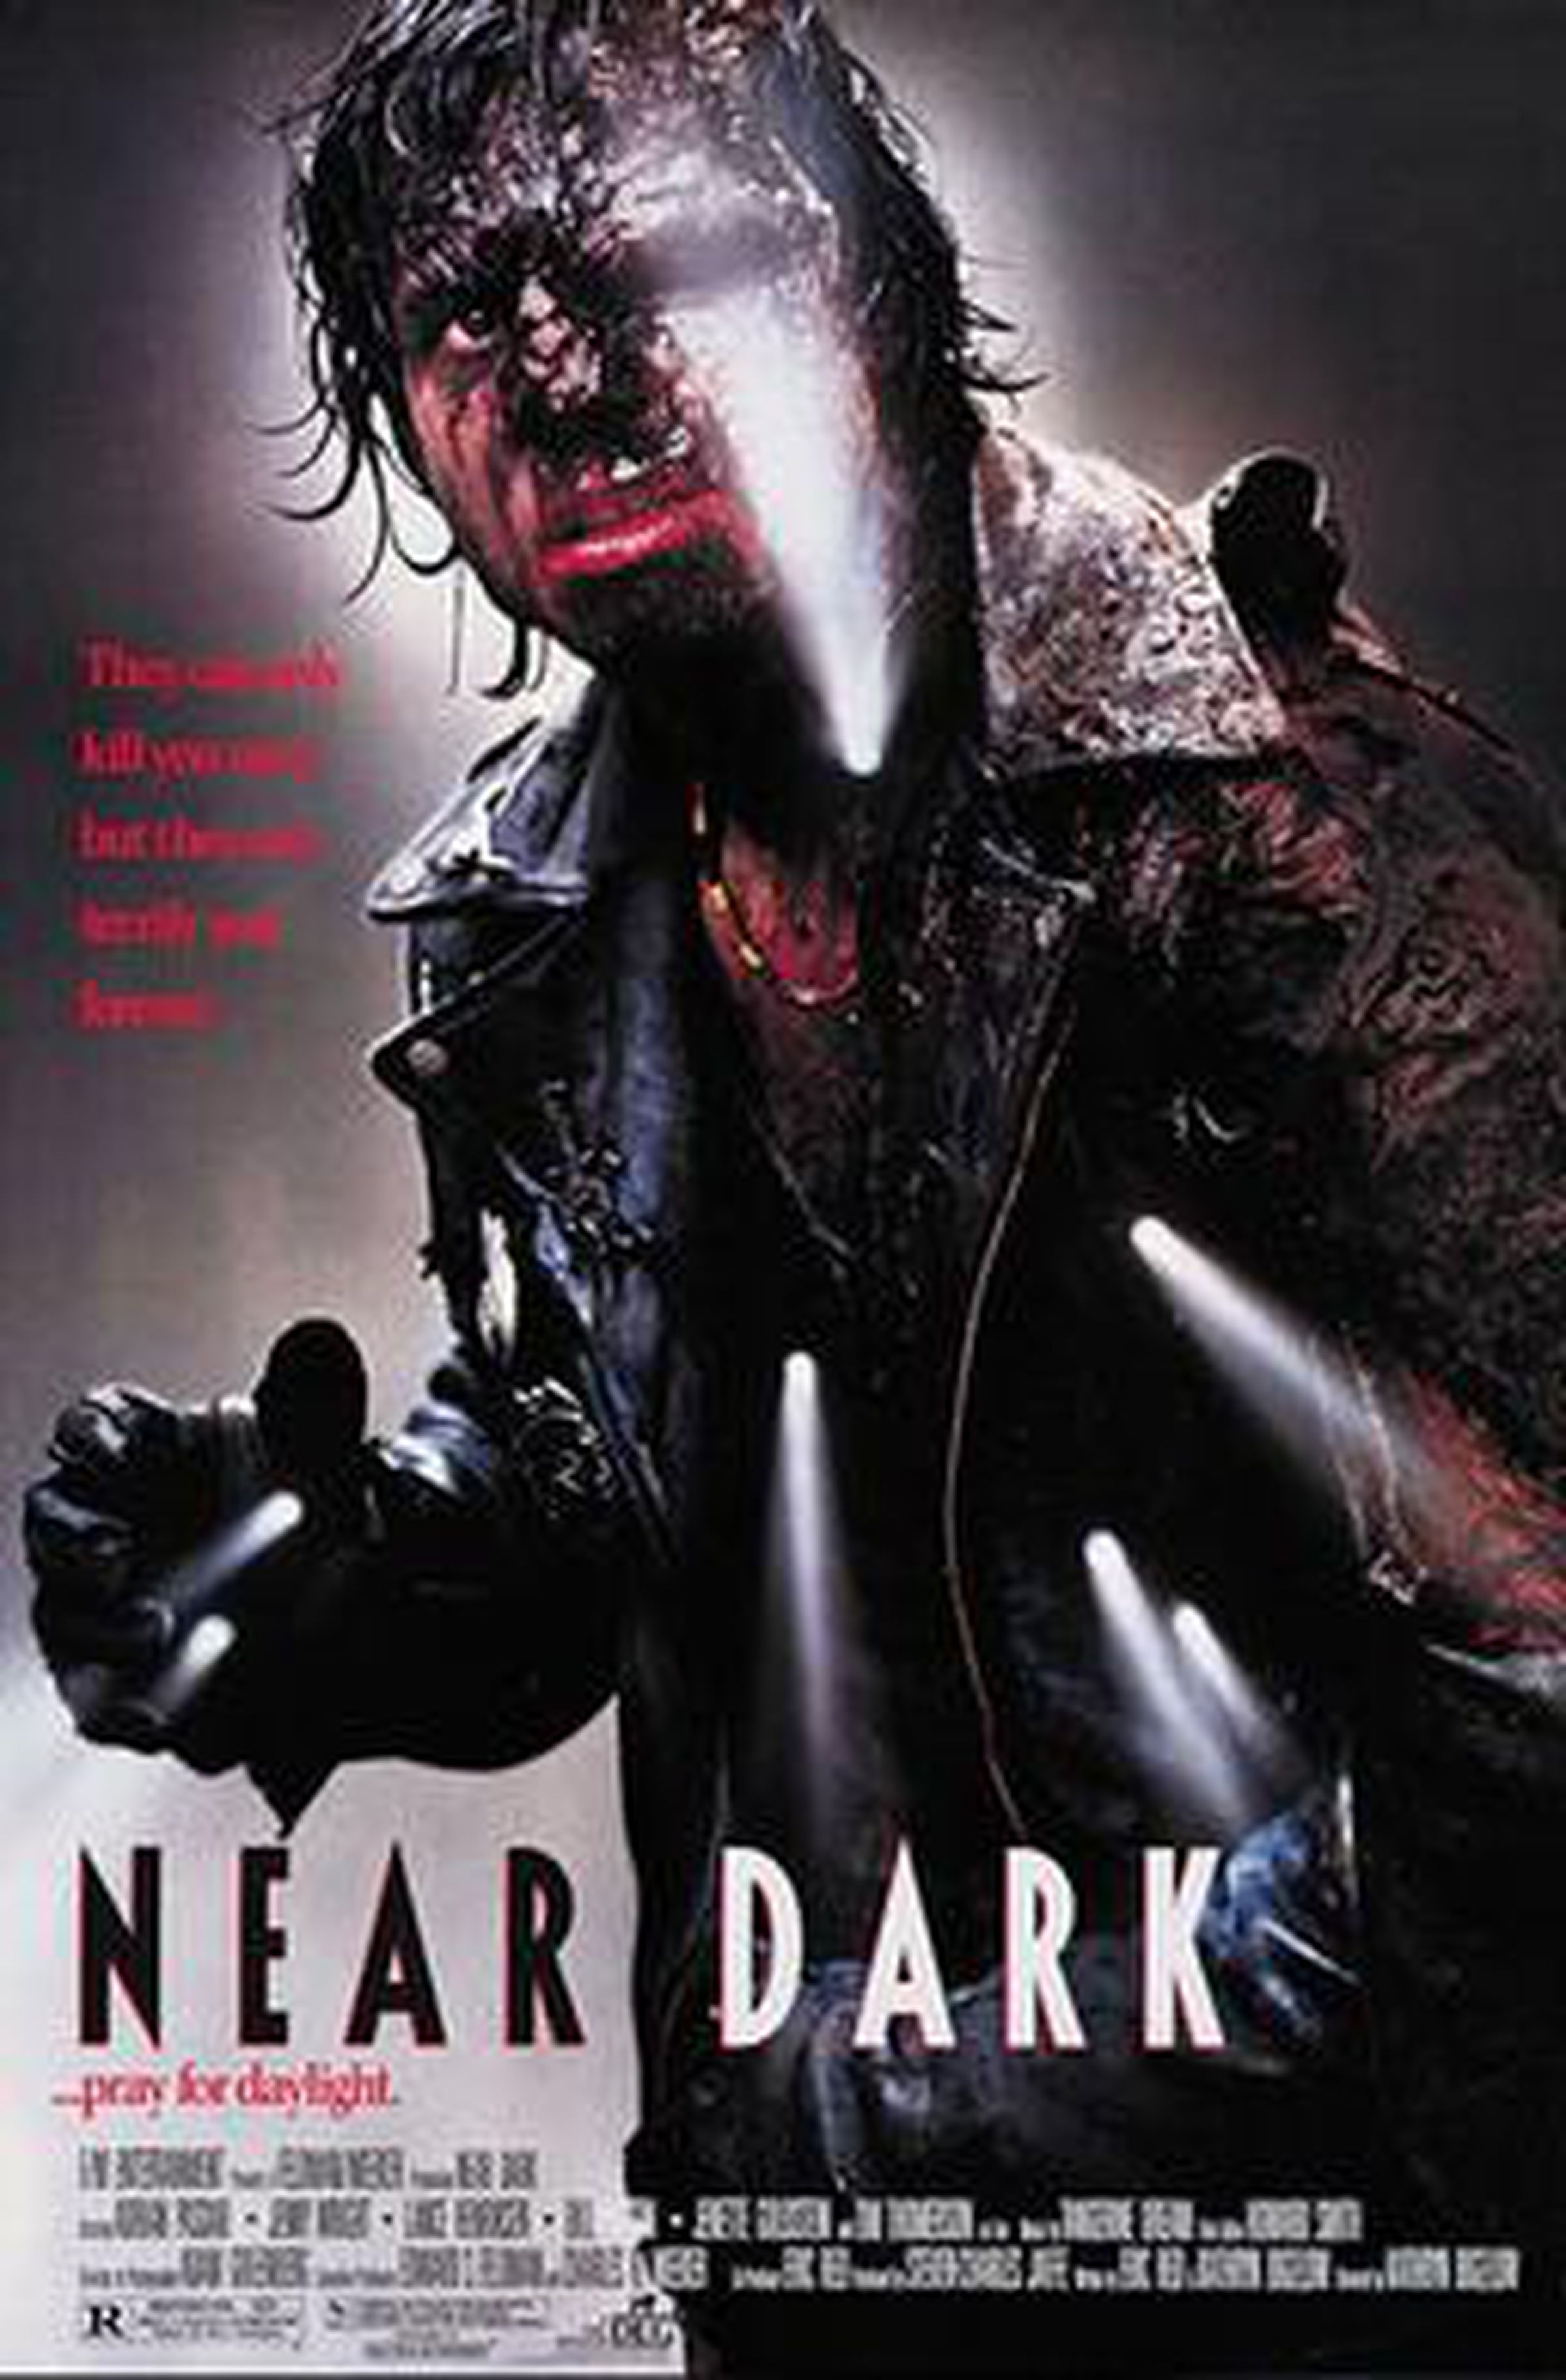 Movie poster for Near Dark, showing scary man with mangled face